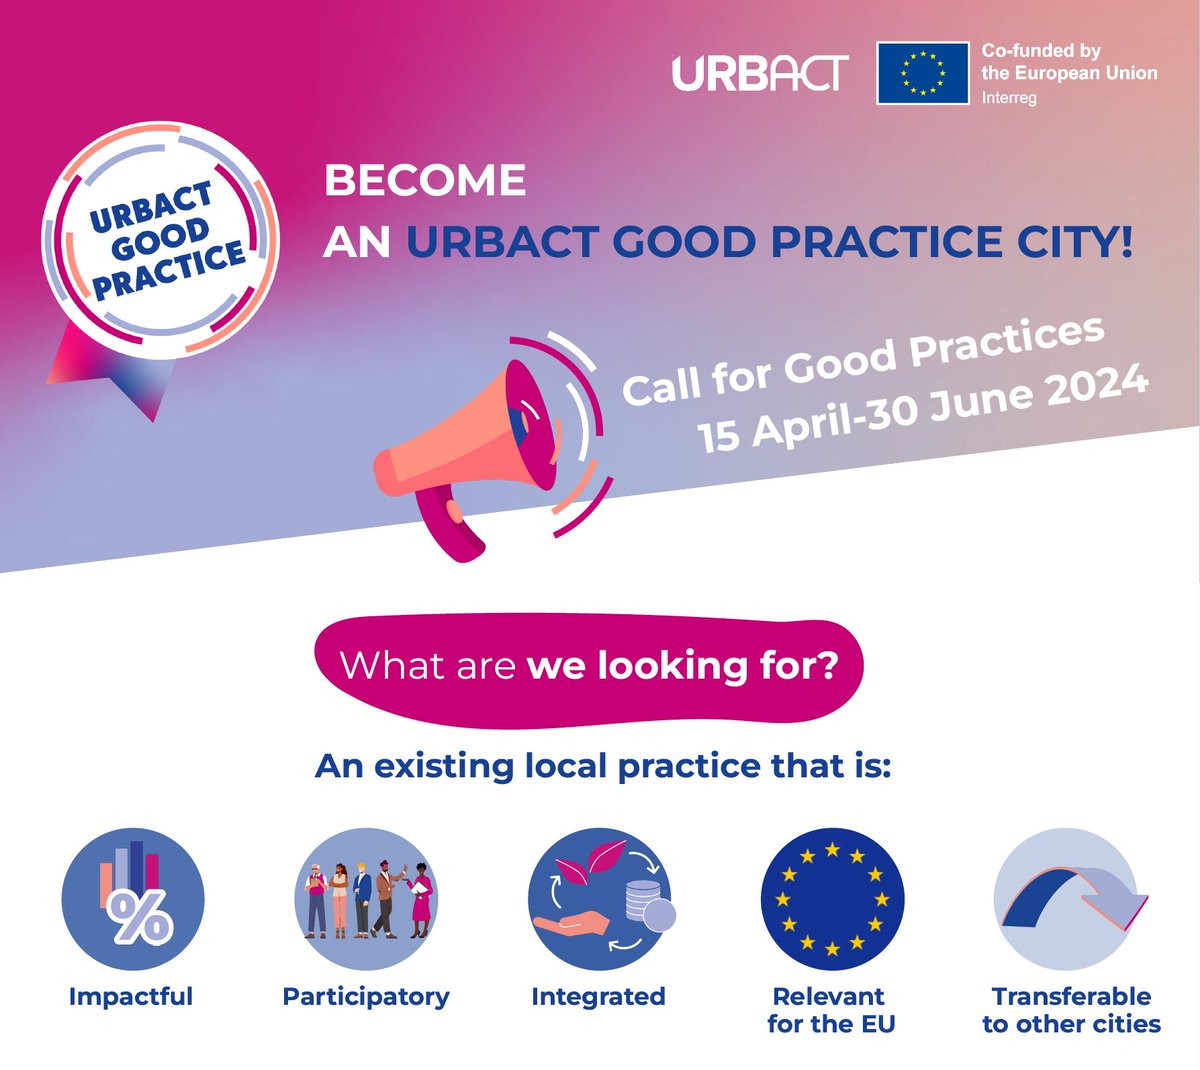 🤔 Interested in becoming an @URBACT Good Practice city? ✍🏽 Attend the upcoming info sessions in your language to find out to how to submit your good practices! 📅 3/5 🇸🇪 Sweden 📅 6/5 🇱🇹 Lithuania 📅 7/5 🇱🇻 Latvia 📅 8/5 🇭🇷 Croatia Register here! urbact.pulse.ly/x3lt41ciqt